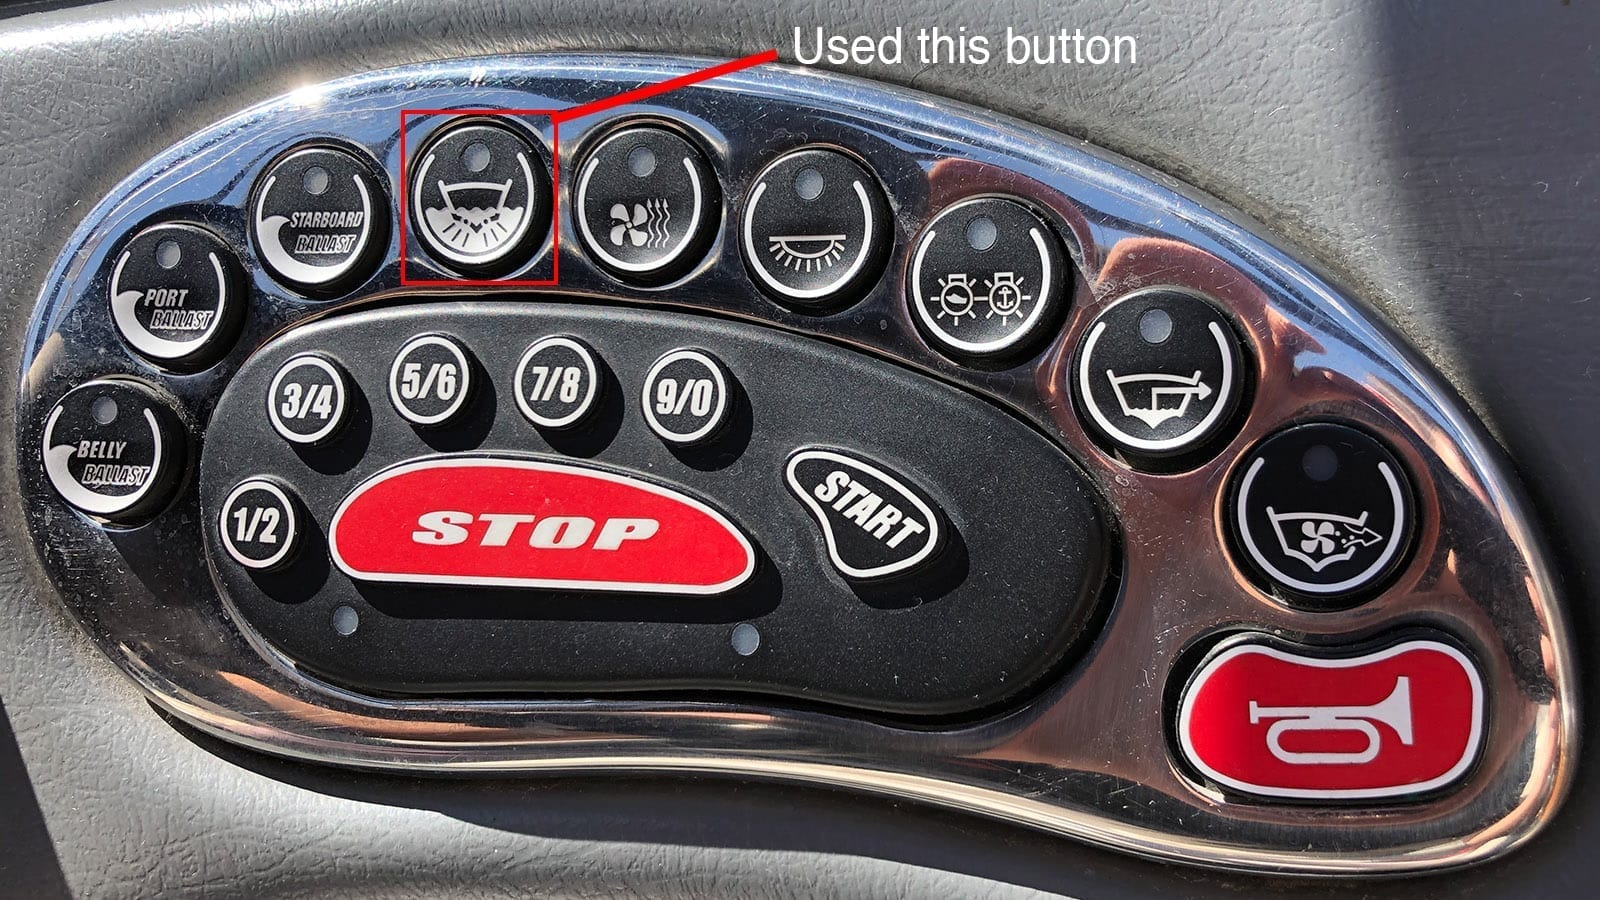 2004 Super Air Nautique Keypad with button highlighted